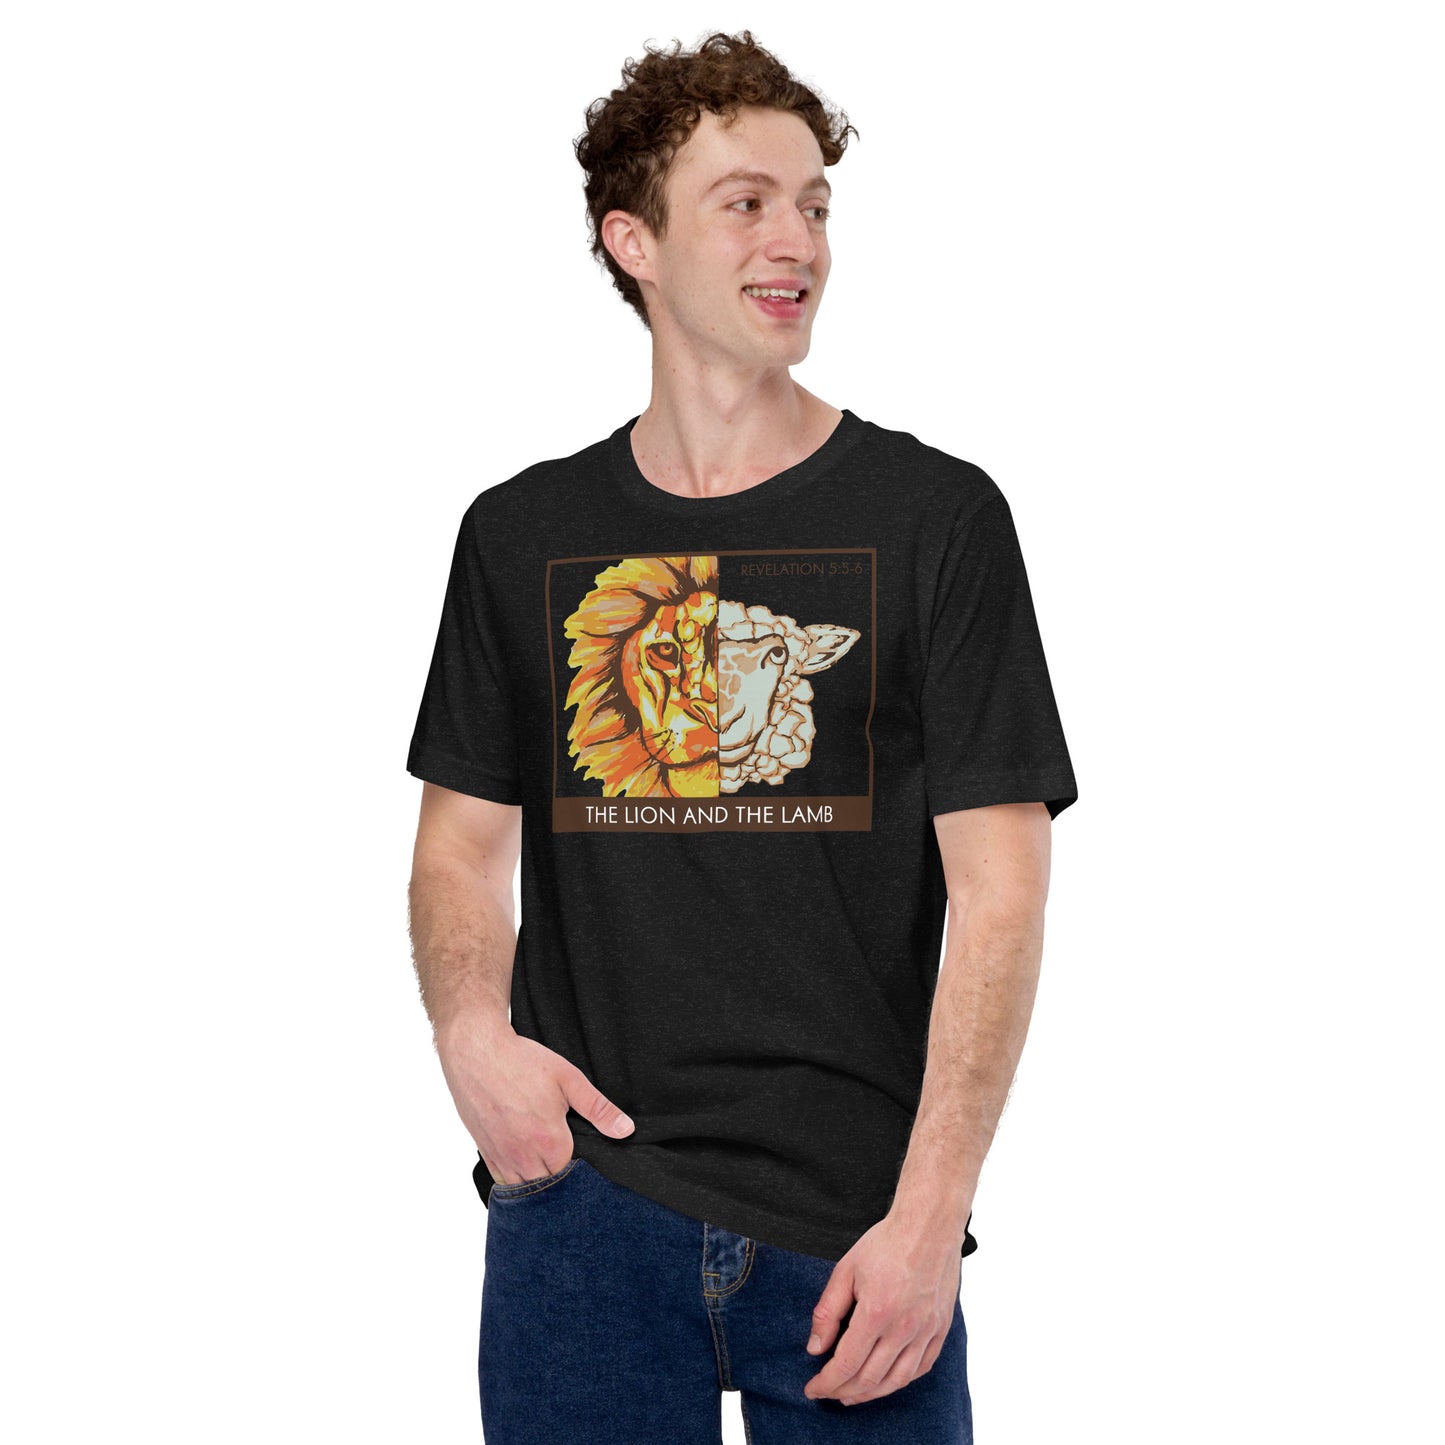 The Lion and the Lamb Men's T-Shirt